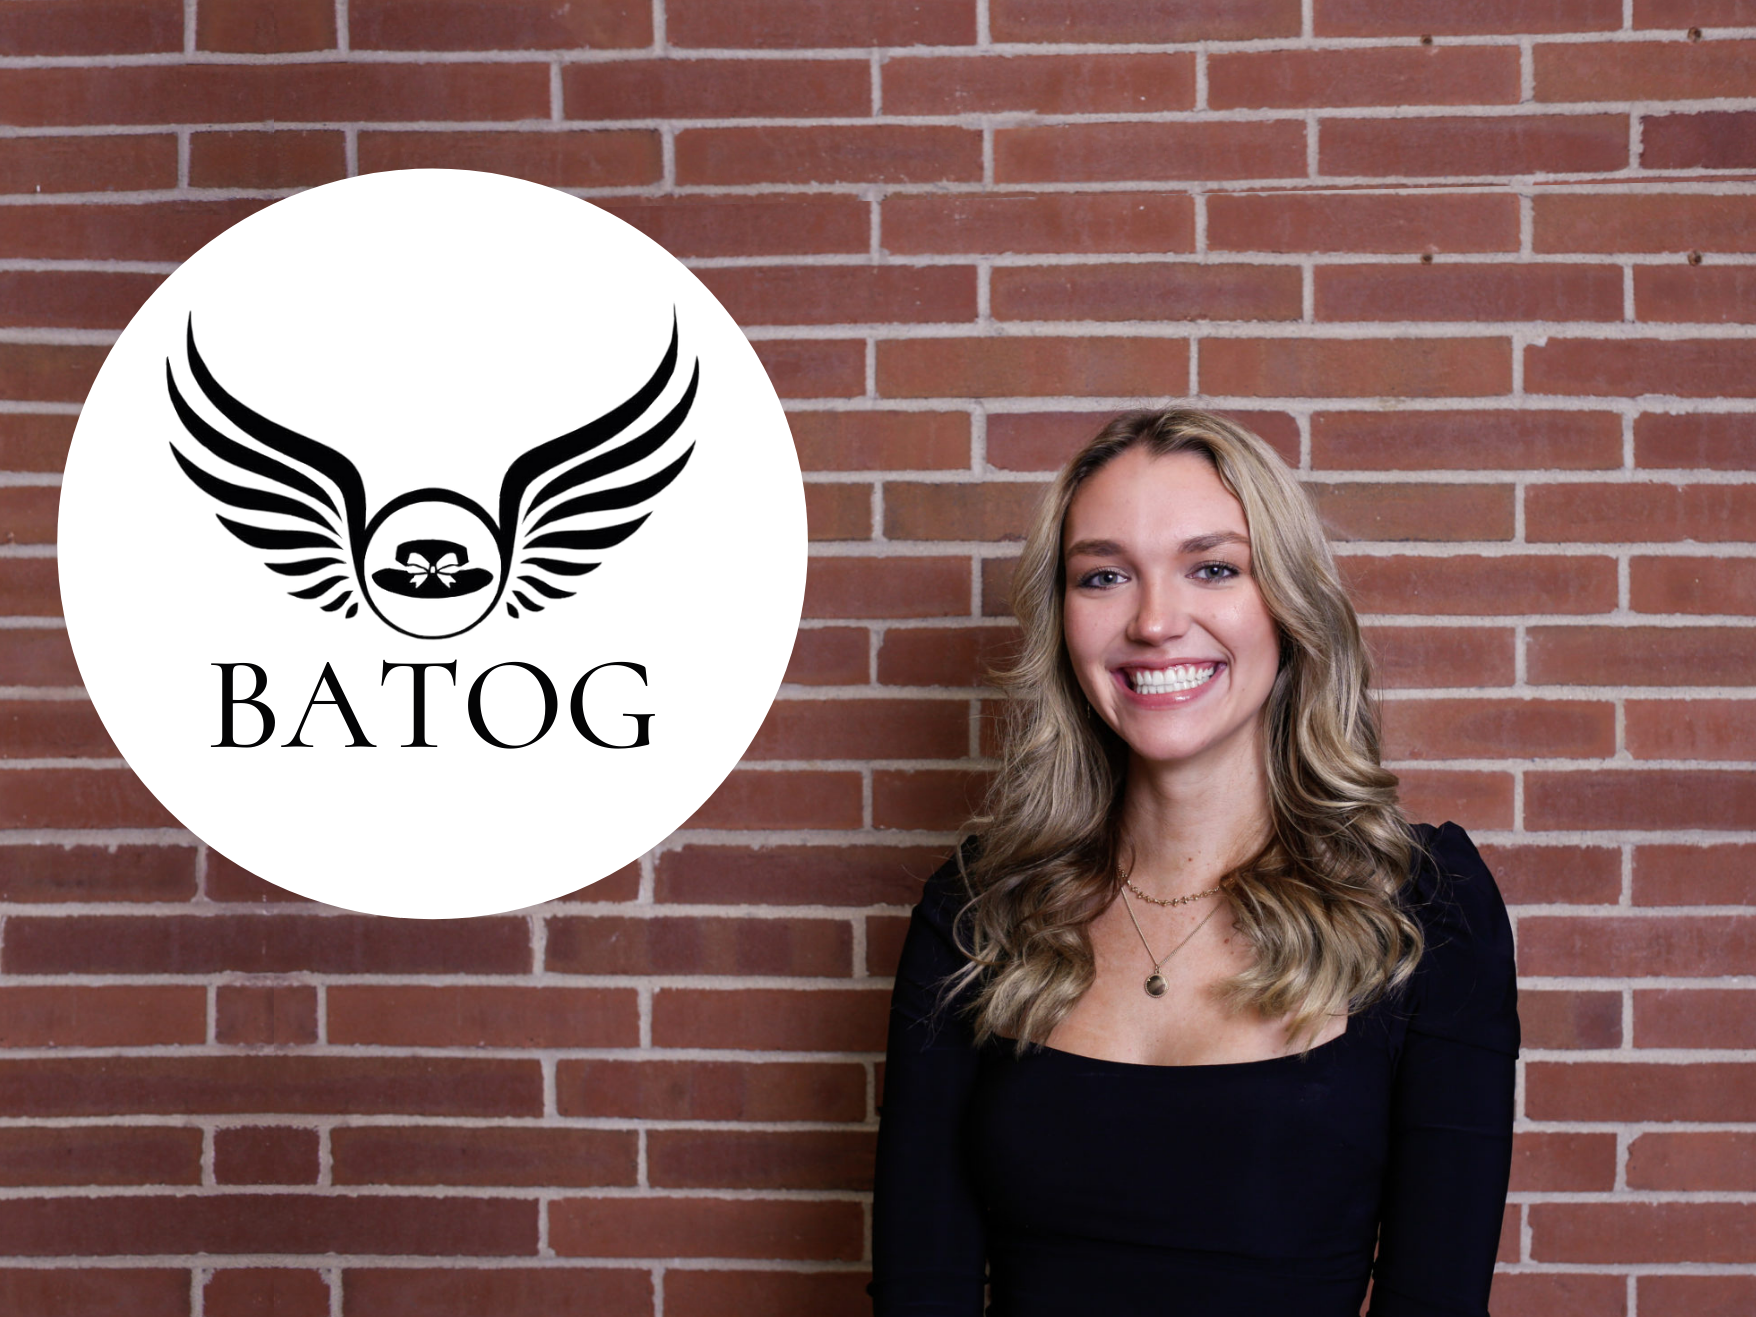 Woman in black top in front of brick wall, smiling at camera next to company logo